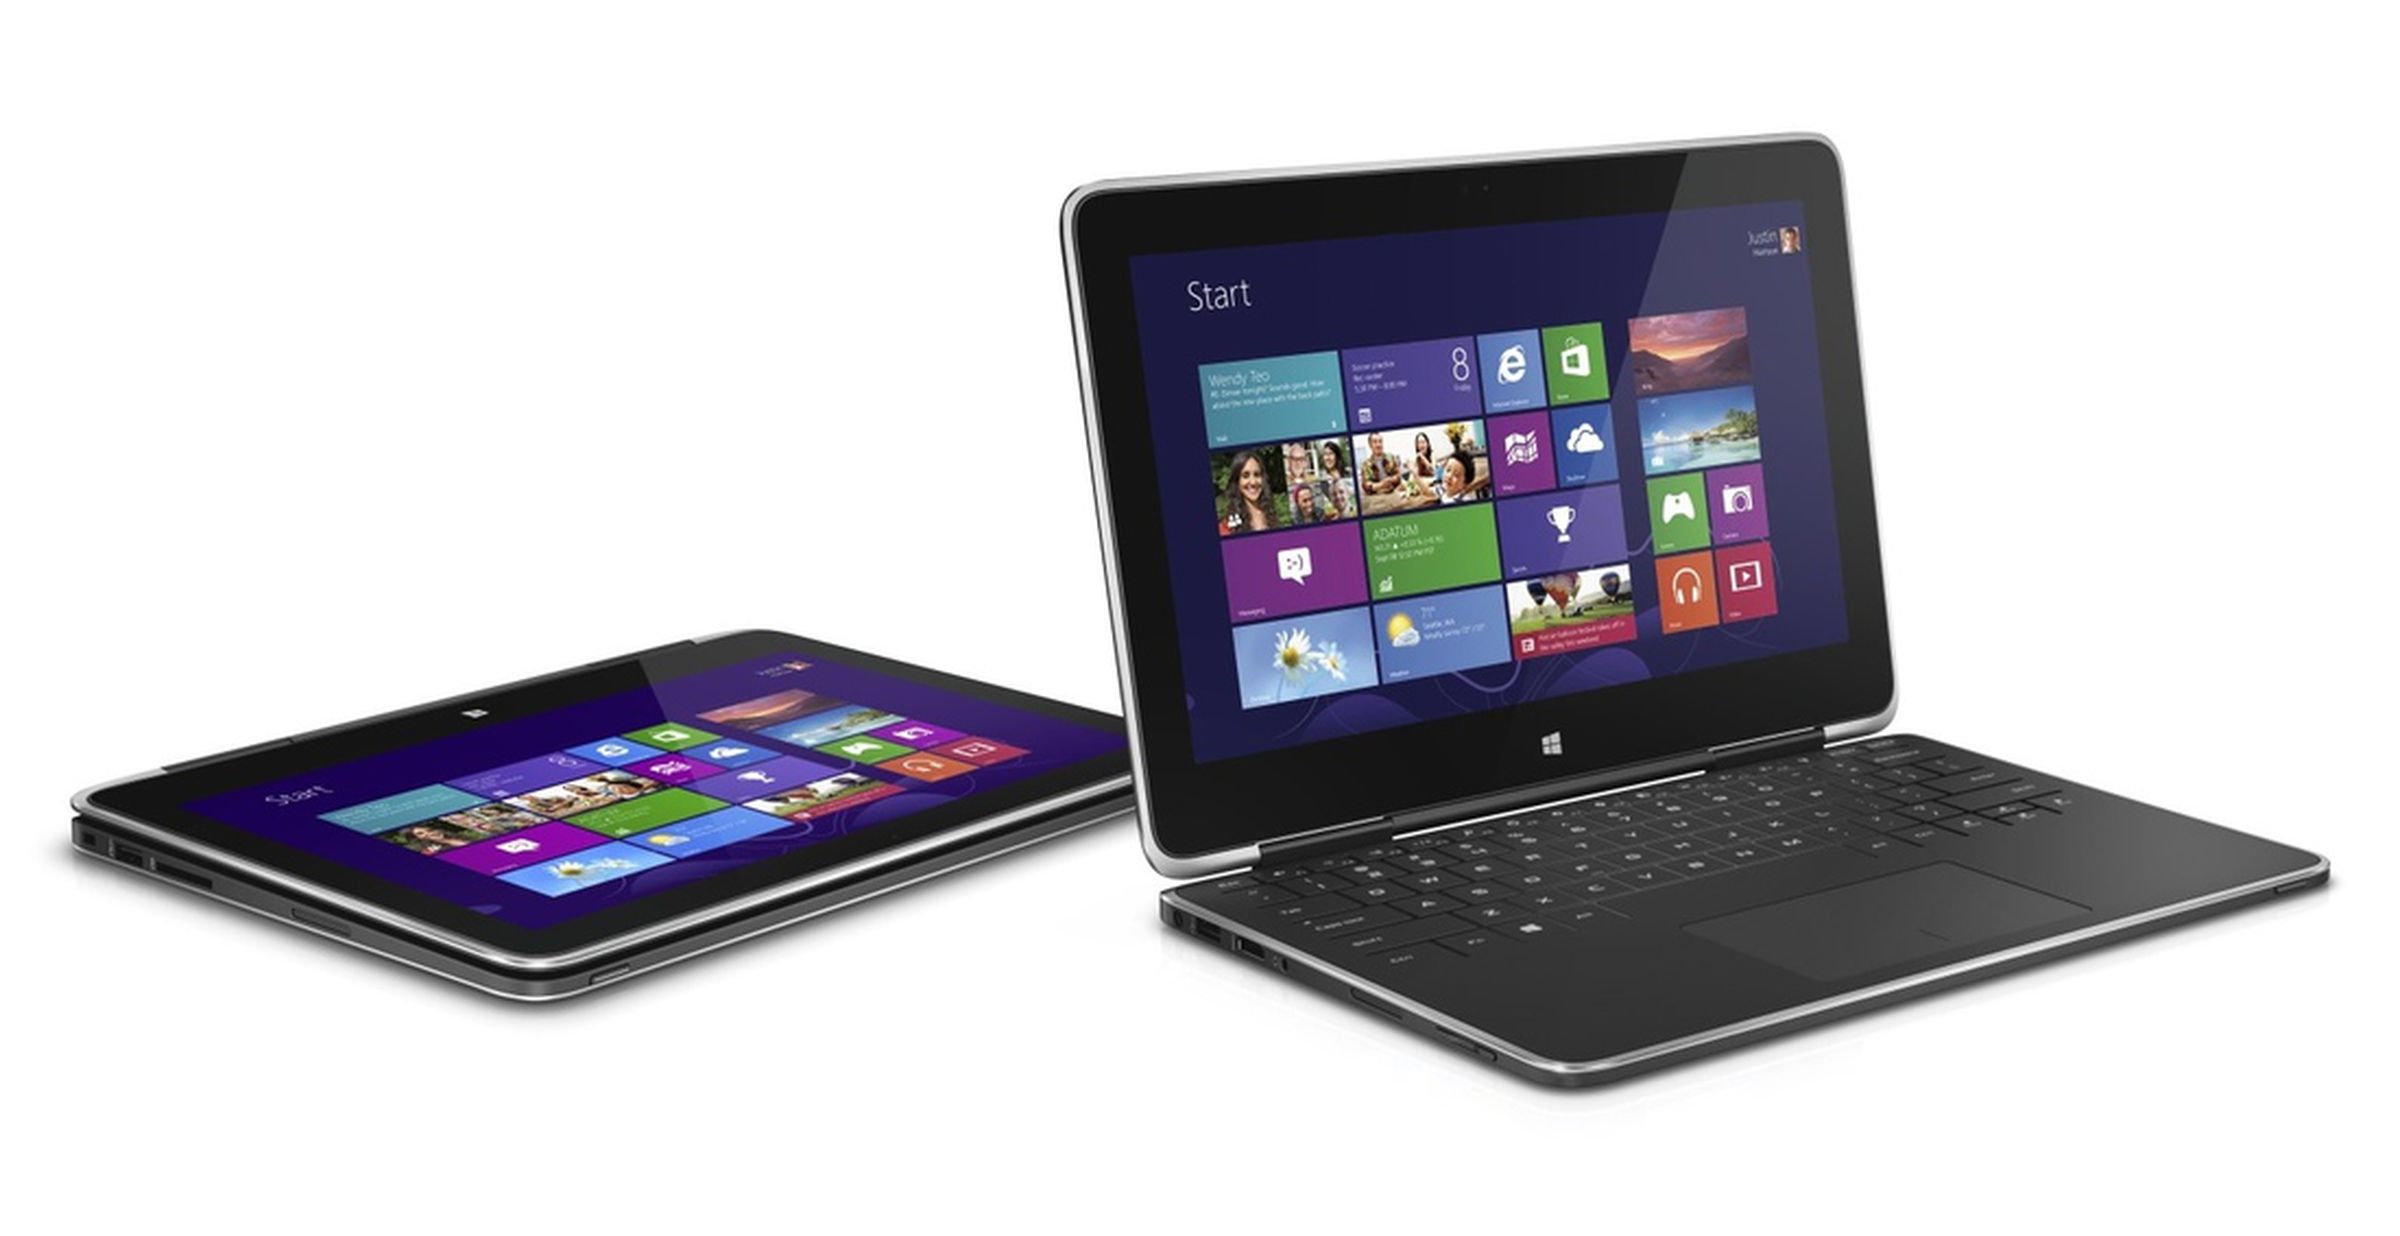 Dell XPS 15, XPS 13 and XPS 11 (2013) press pictures